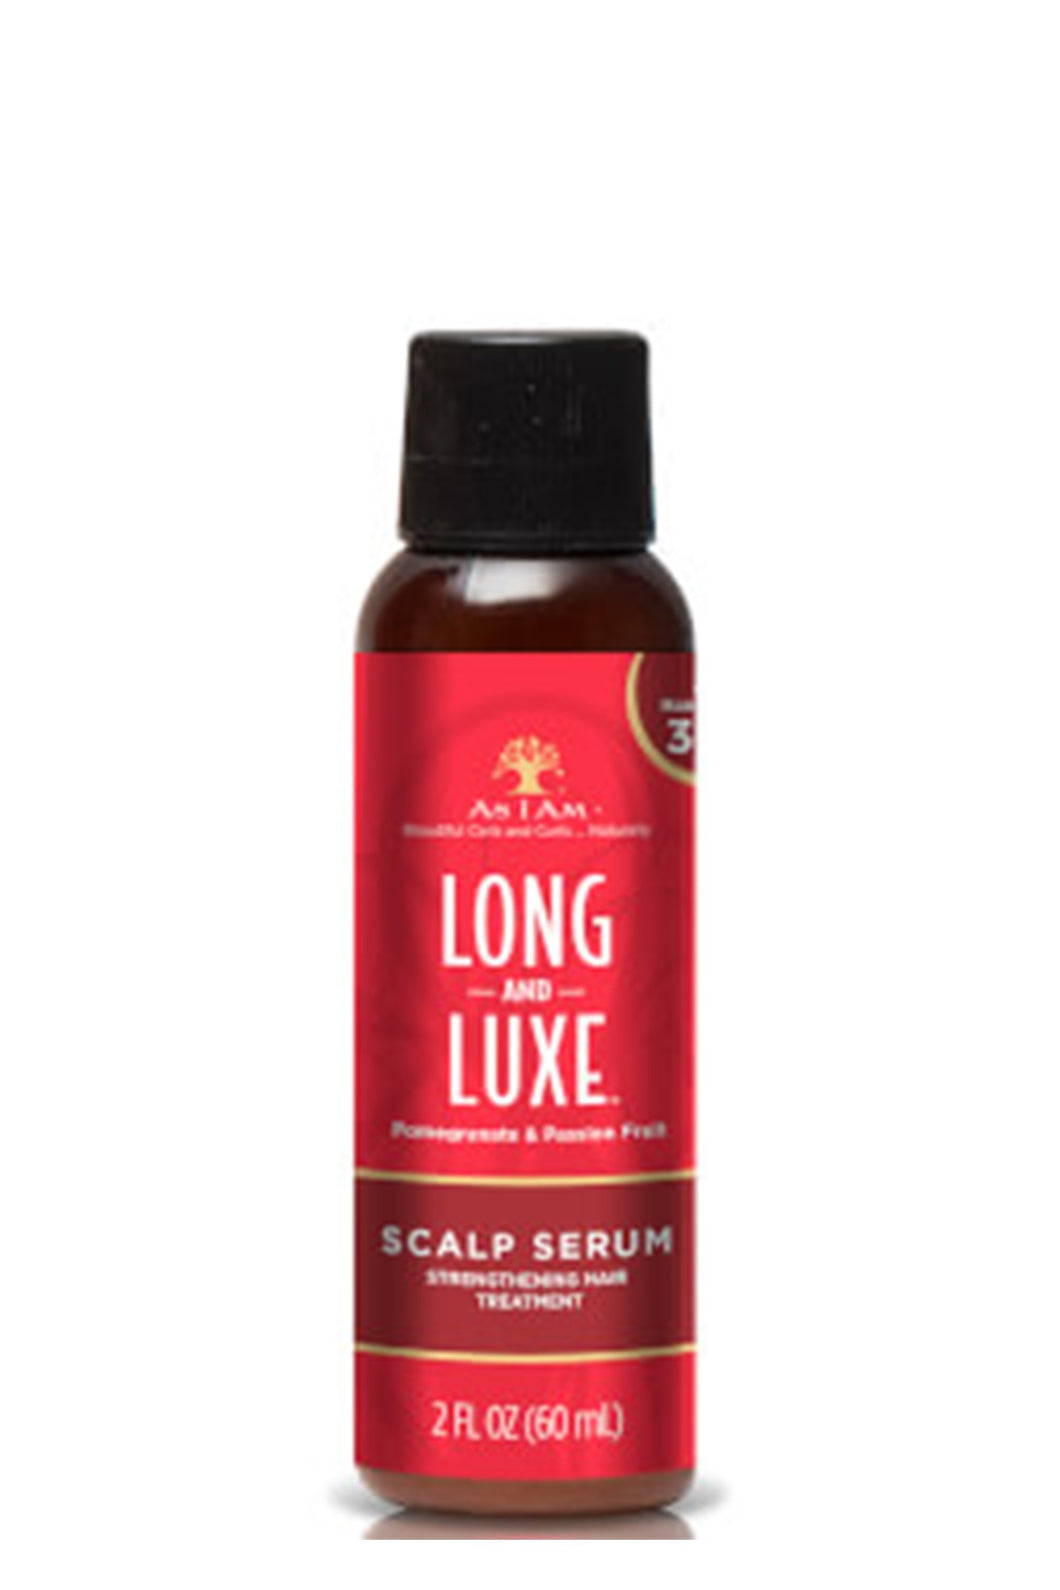 AS I AM Long and Luxe Scalp Serum Product Bottle